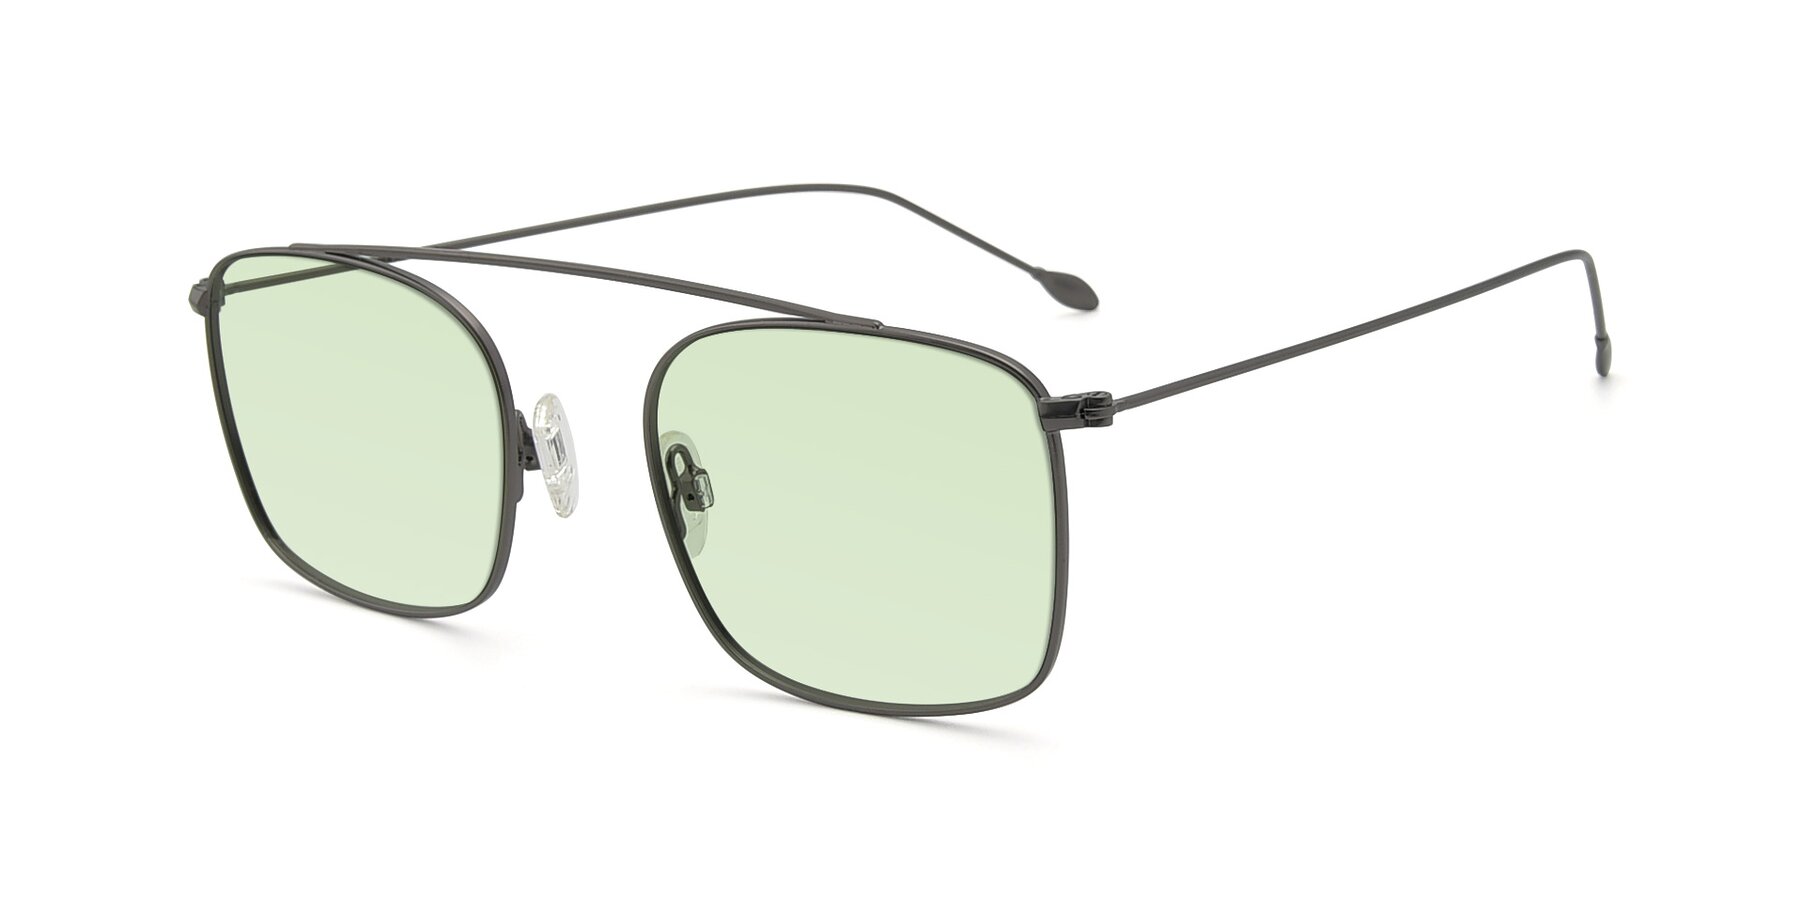 Angle of The Librarian in Gunmetal with Light Green Tinted Lenses